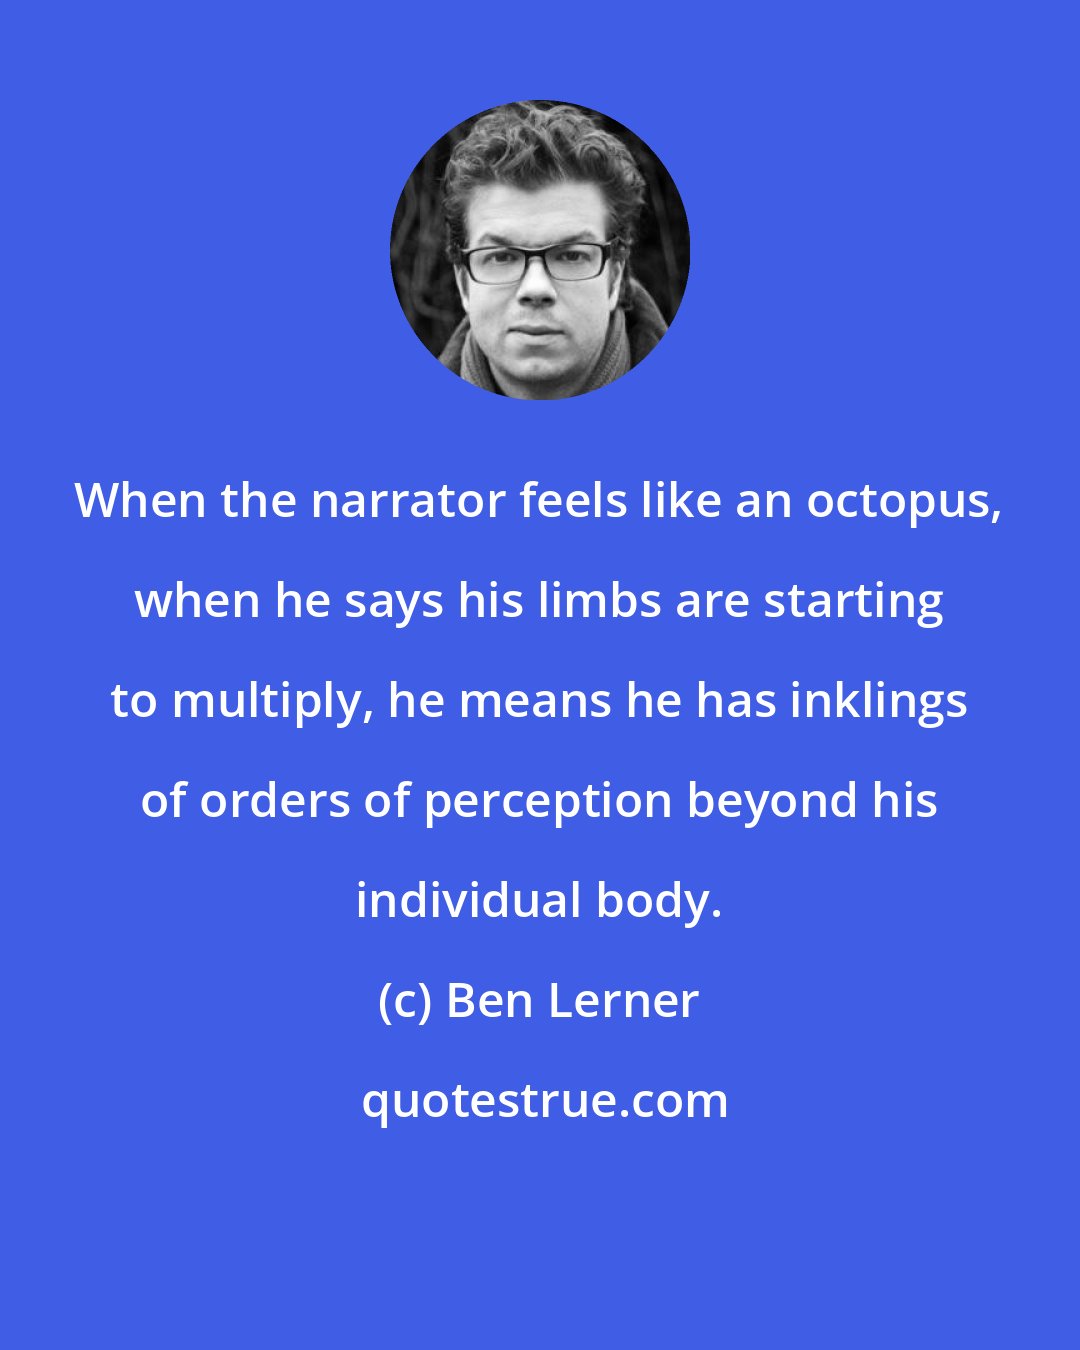 Ben Lerner: When the narrator feels like an octopus, when he says his limbs are starting to multiply, he means he has inklings of orders of perception beyond his individual body.